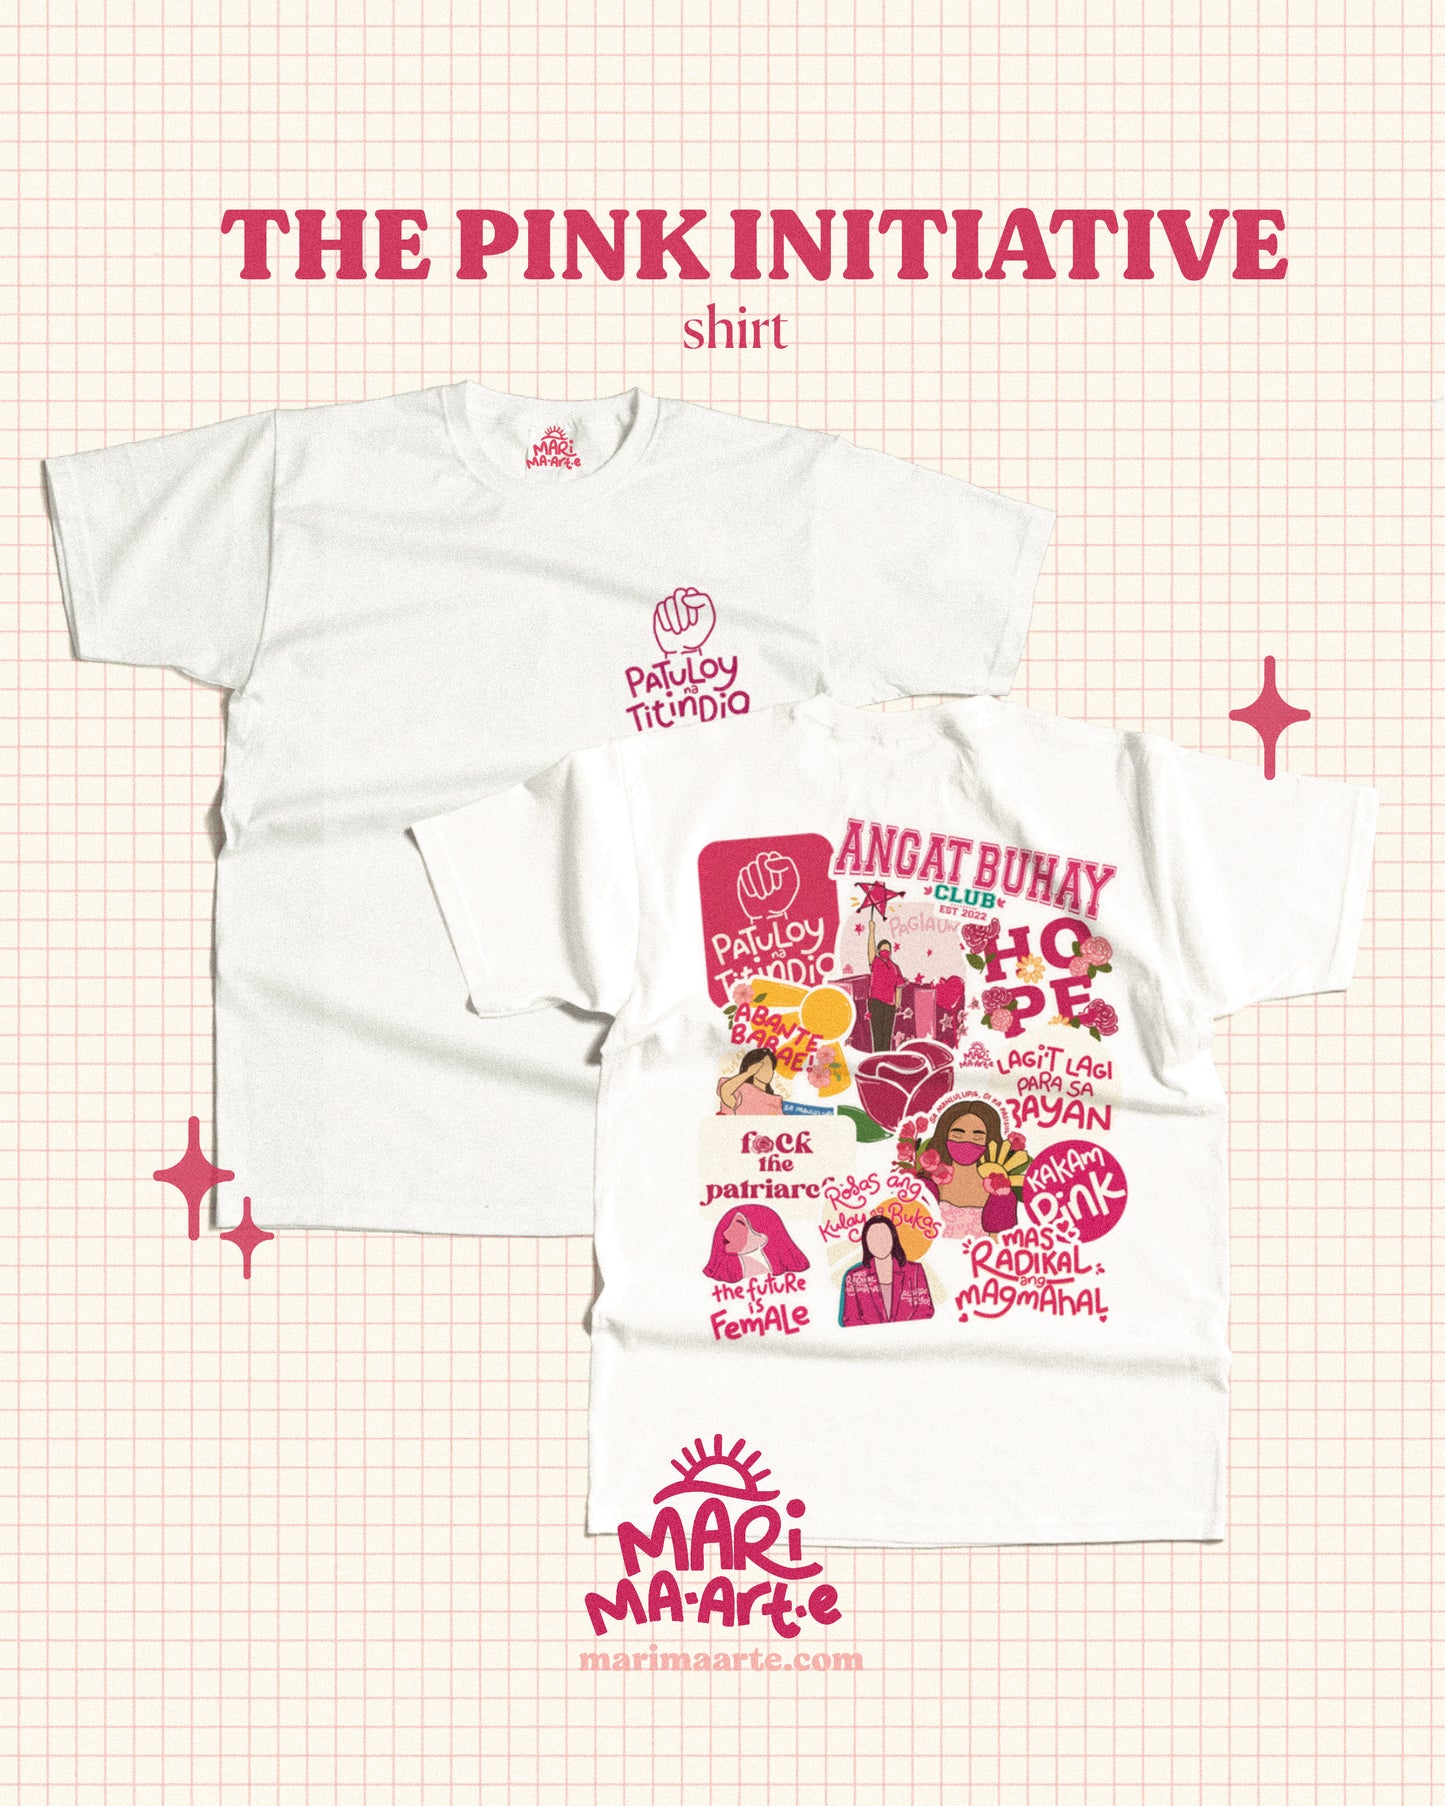 THE PINK INITIATIVE SHIRT